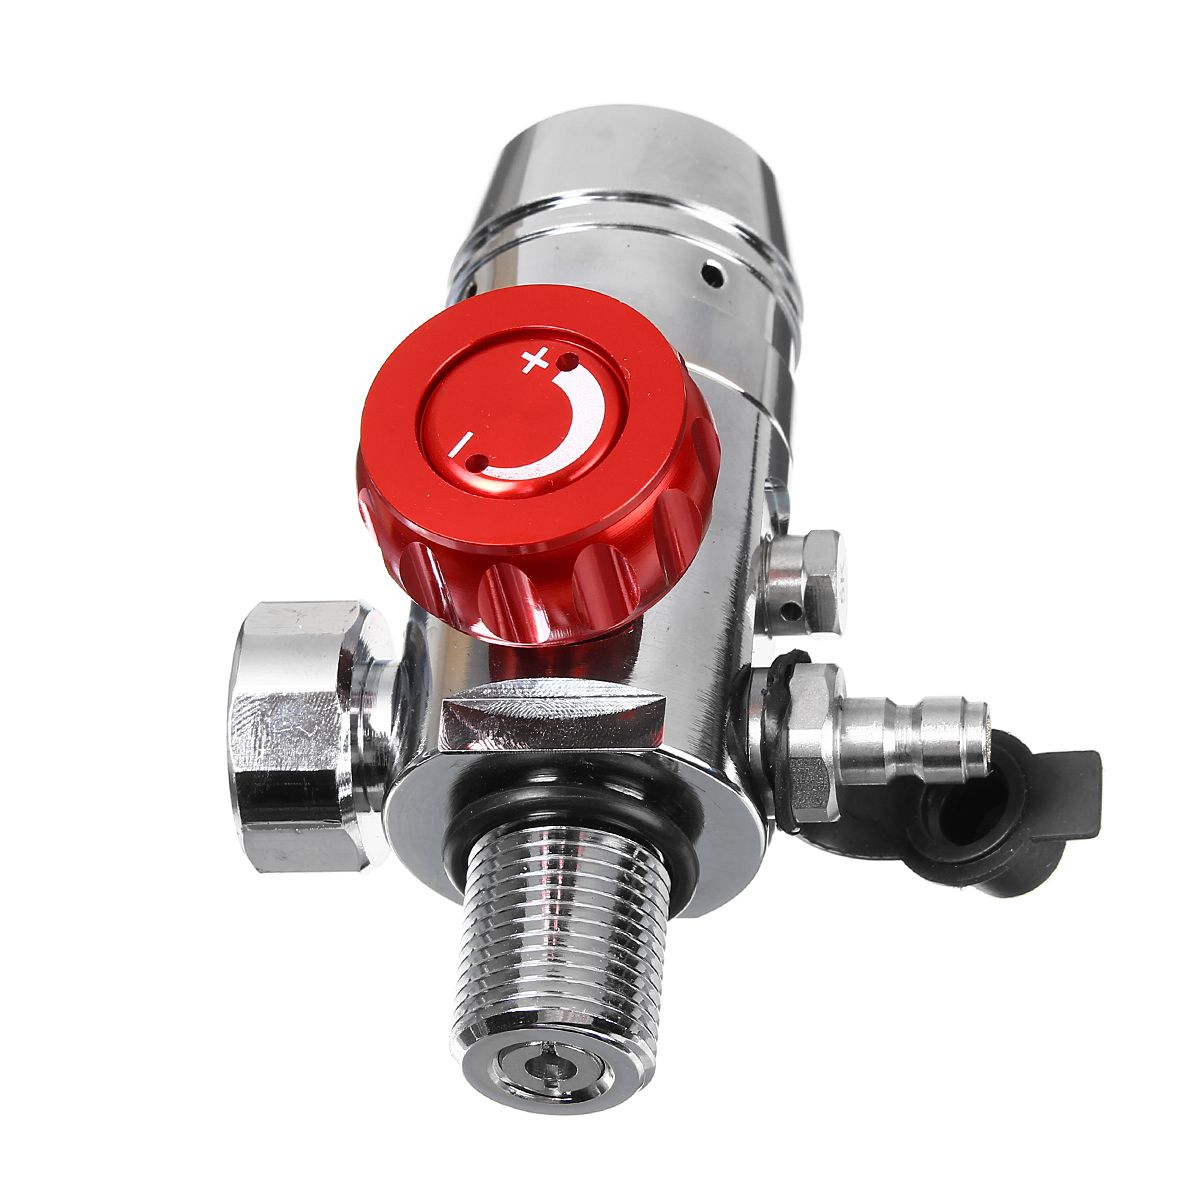 Silver-S400-First-Level-Pressure-Gauge-Reducing-Valve-Use-With-1L-Oxygen-Cylinder-1571267